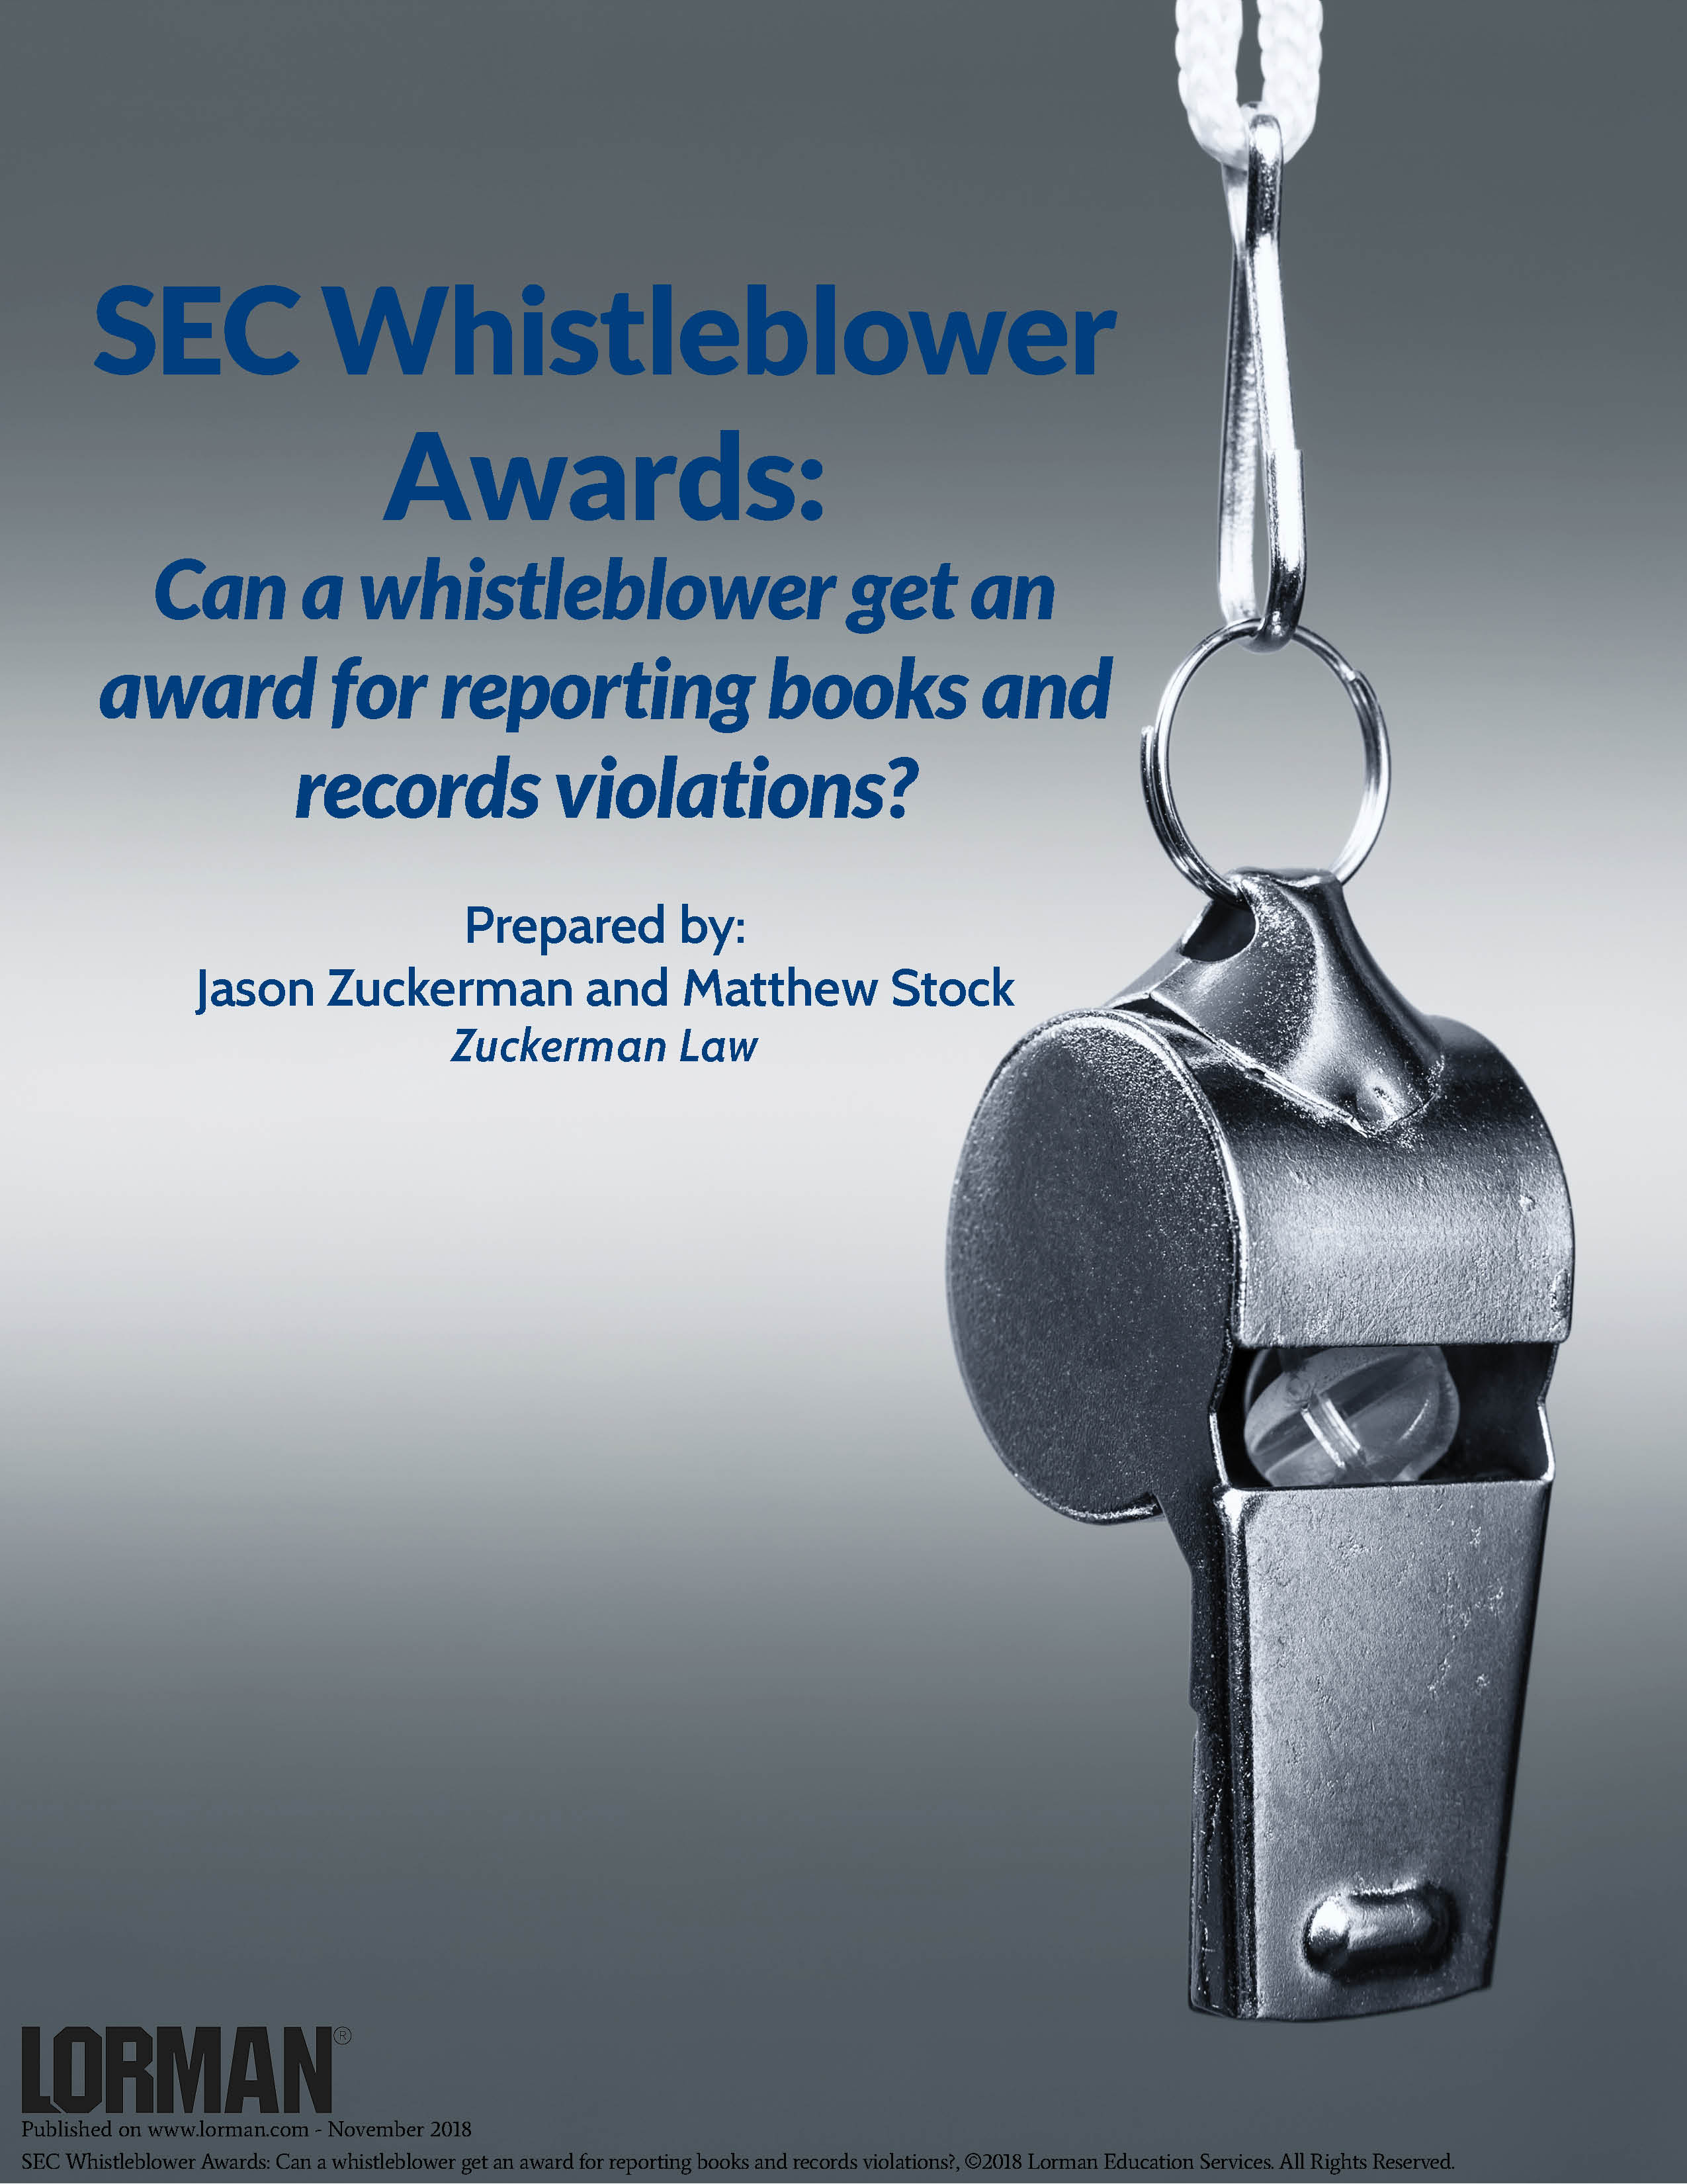 SEC Whistleblower Awards: Can whistleblower get an award for reporting books and records violations?